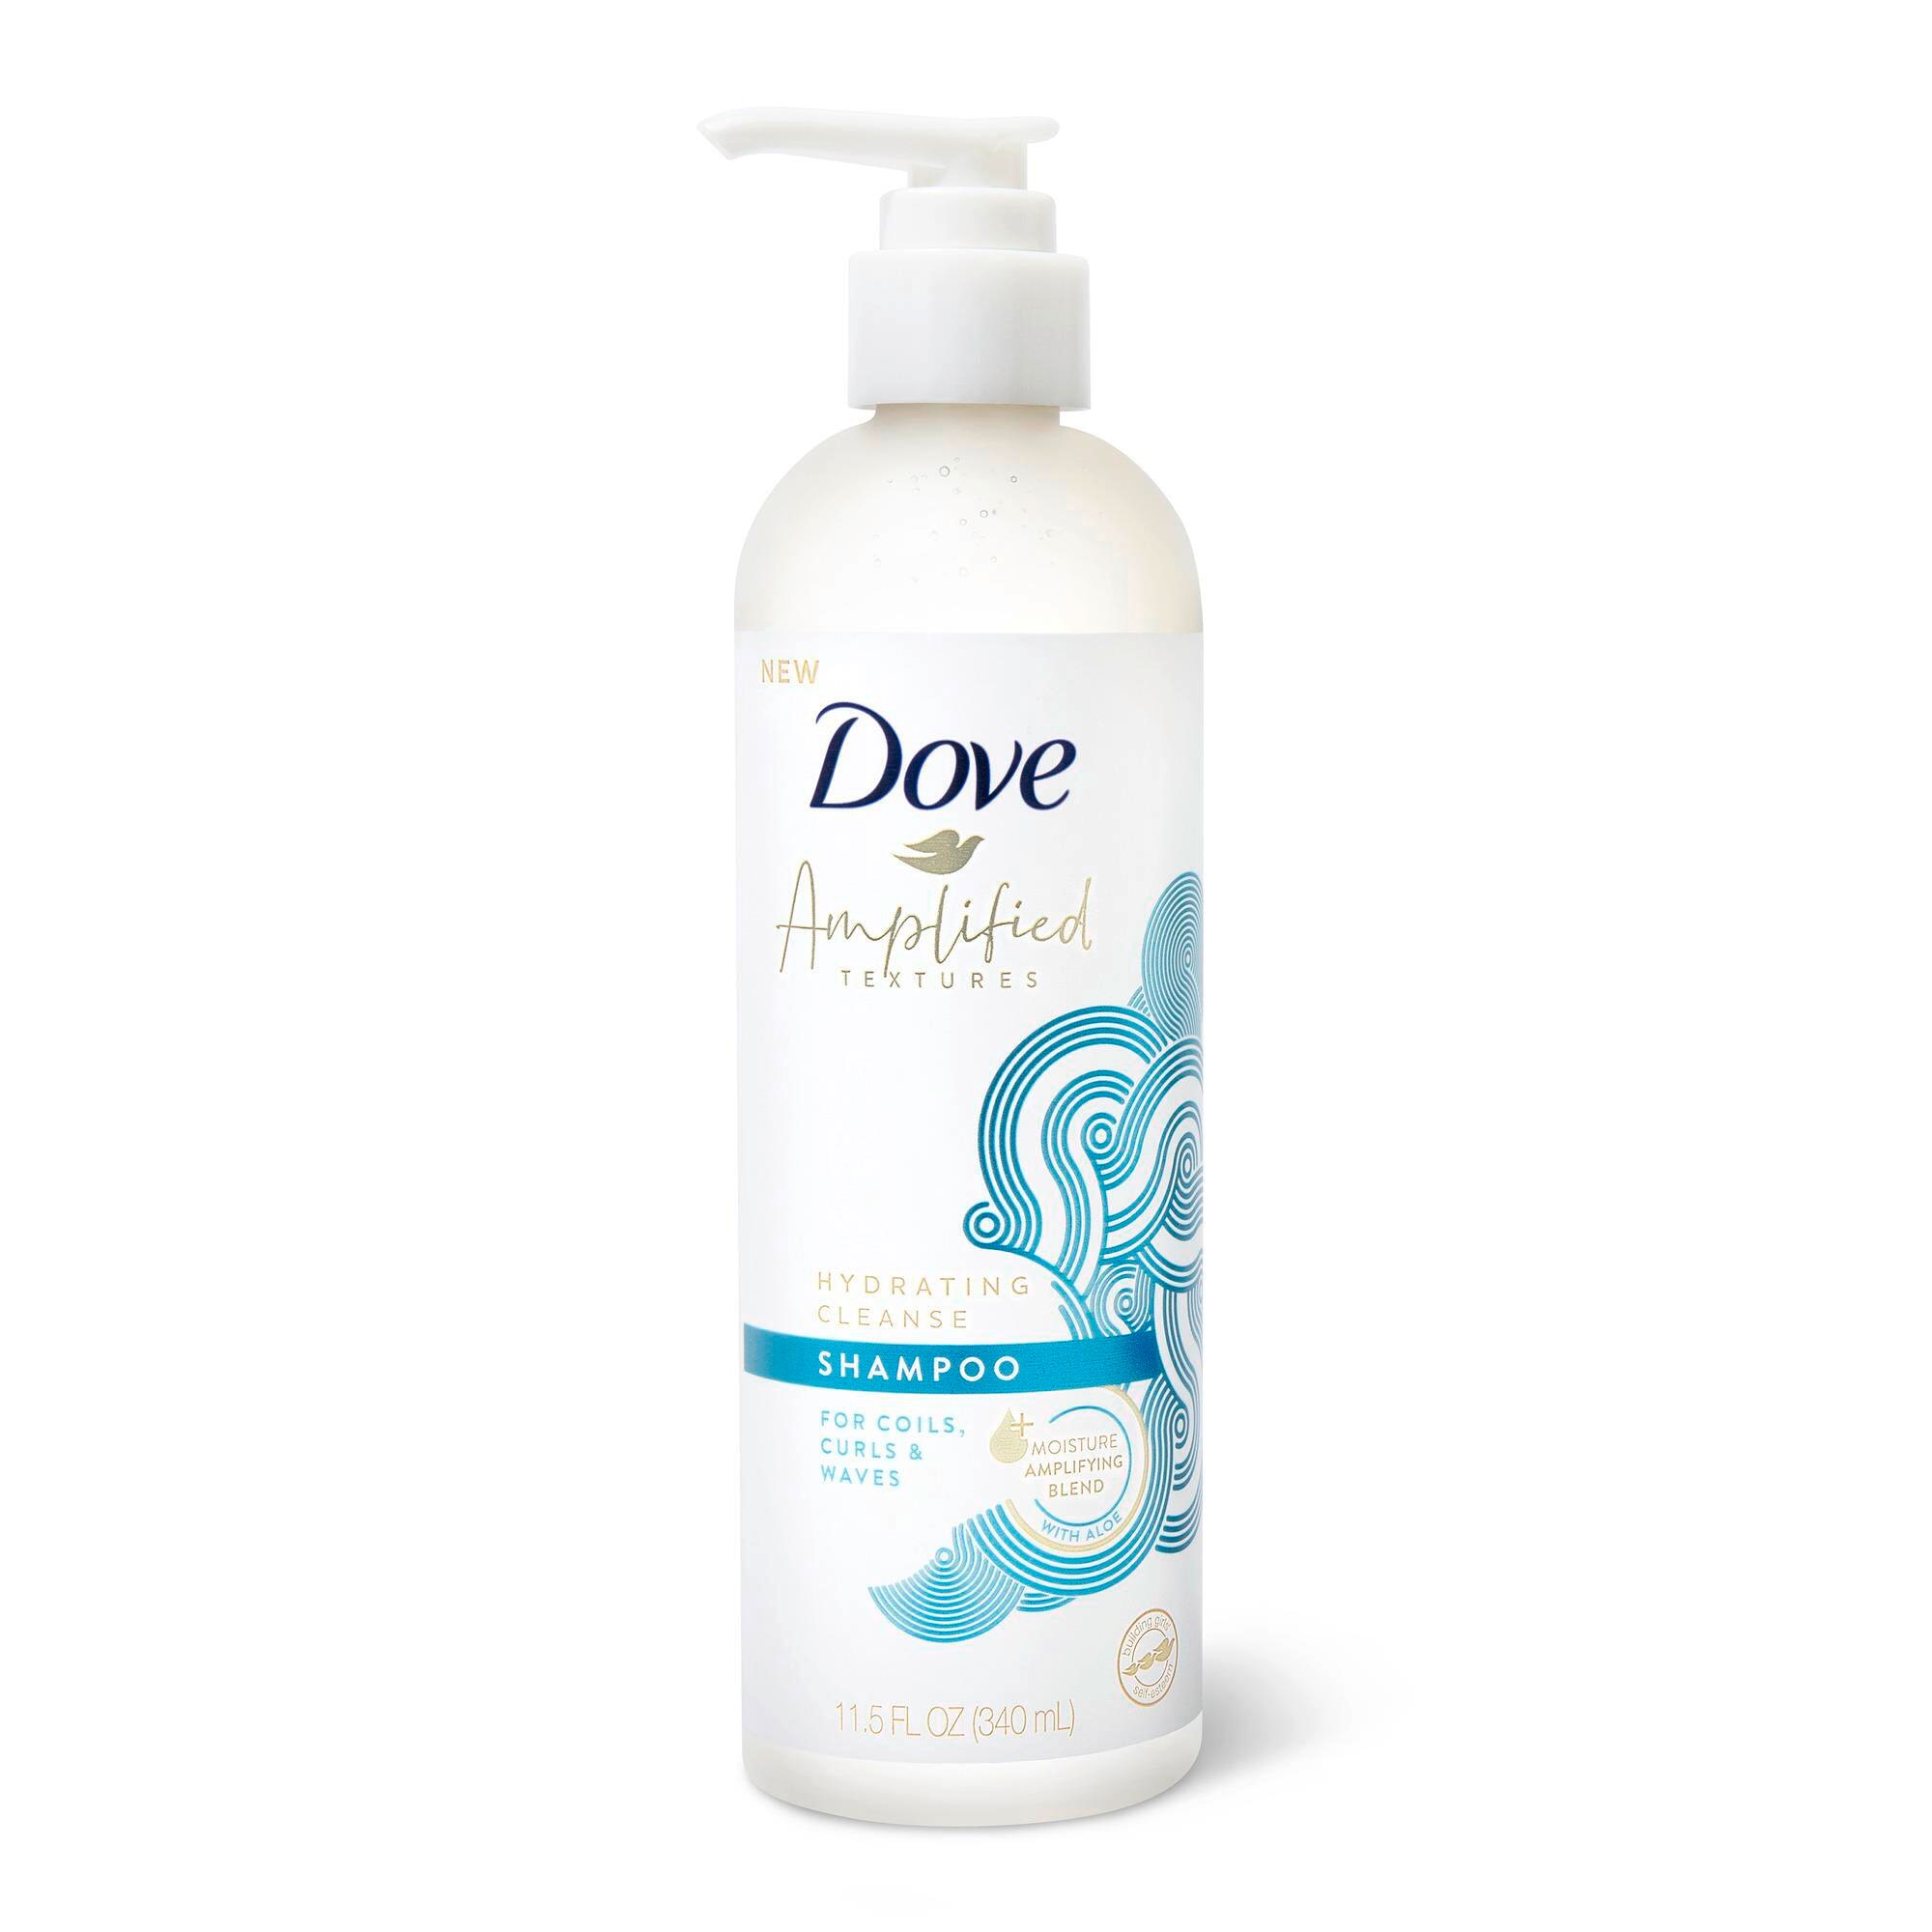 Dove Amplified Textures Hydrating Cleanse with Moisture Amplifying blend Shampoo for curly hair 340 ml